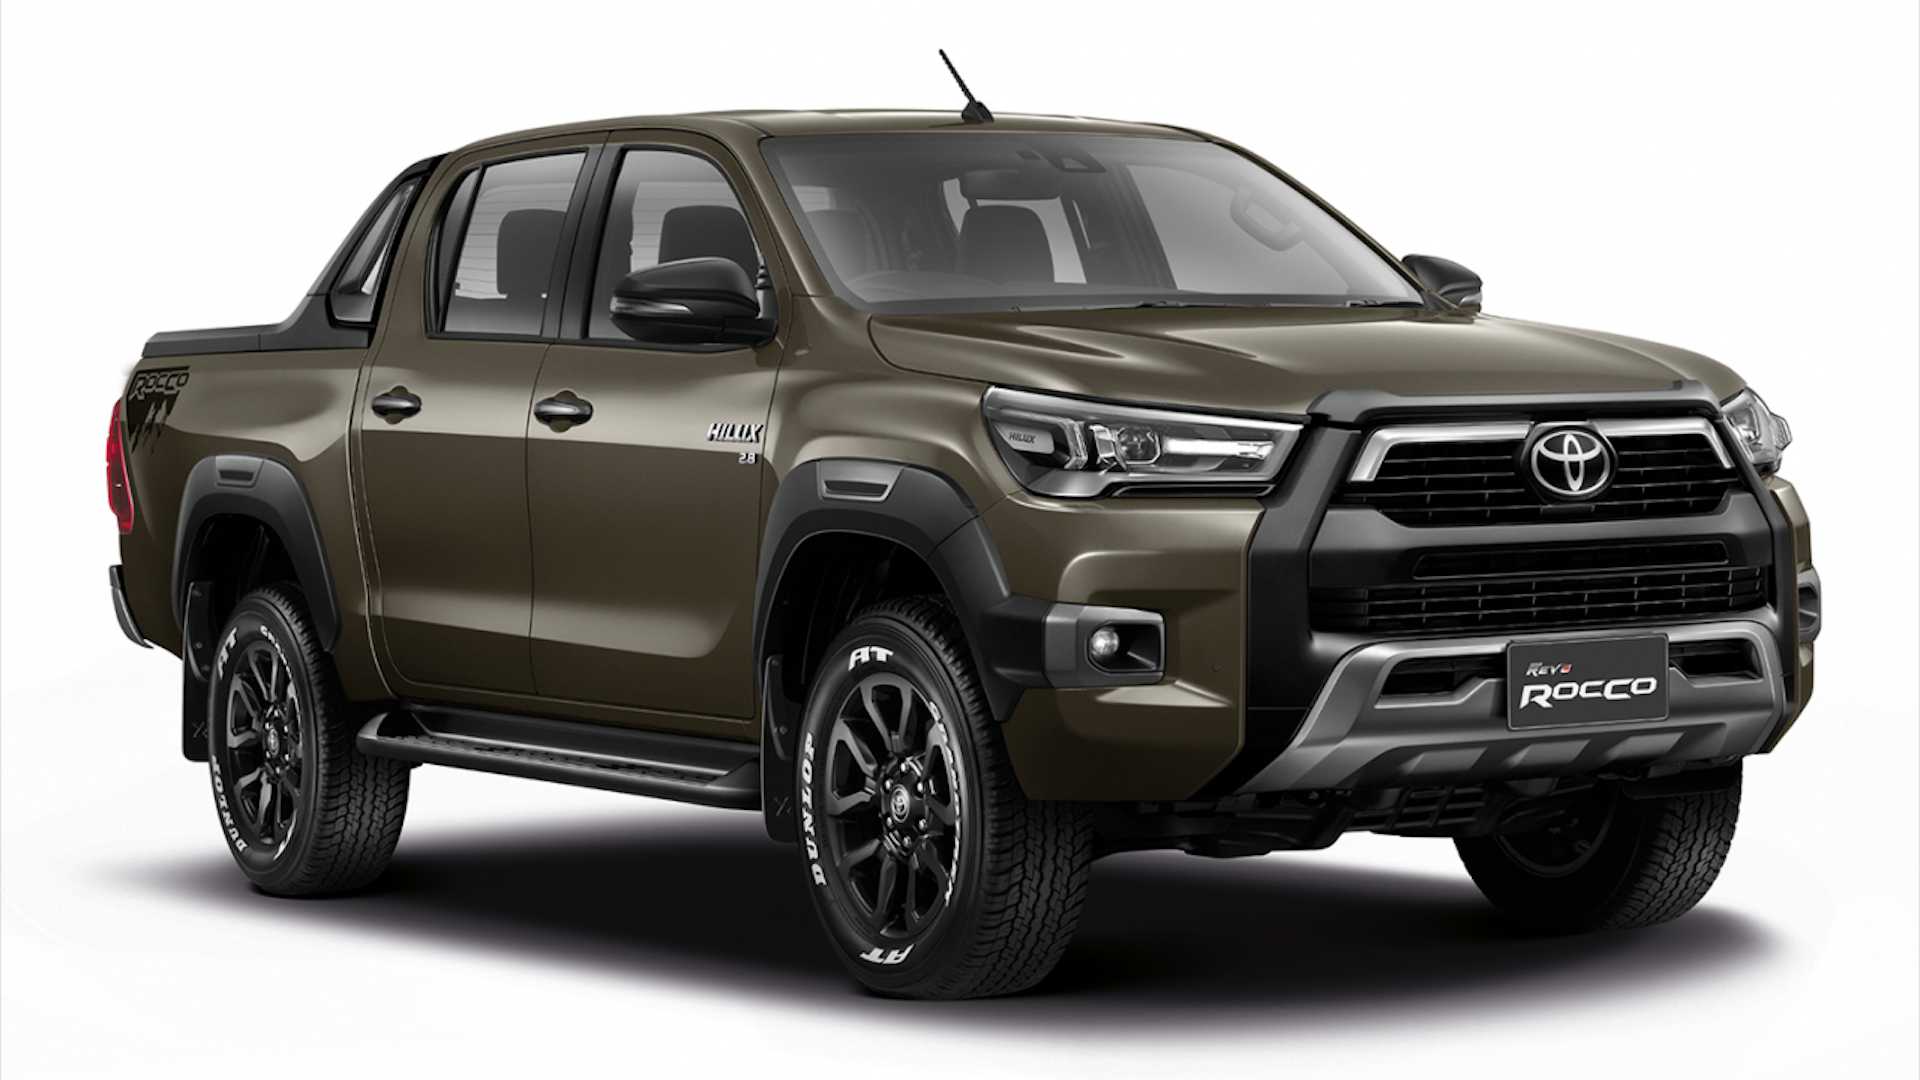 2021-toyota-hilux-launched-in-thailand-2.jpg